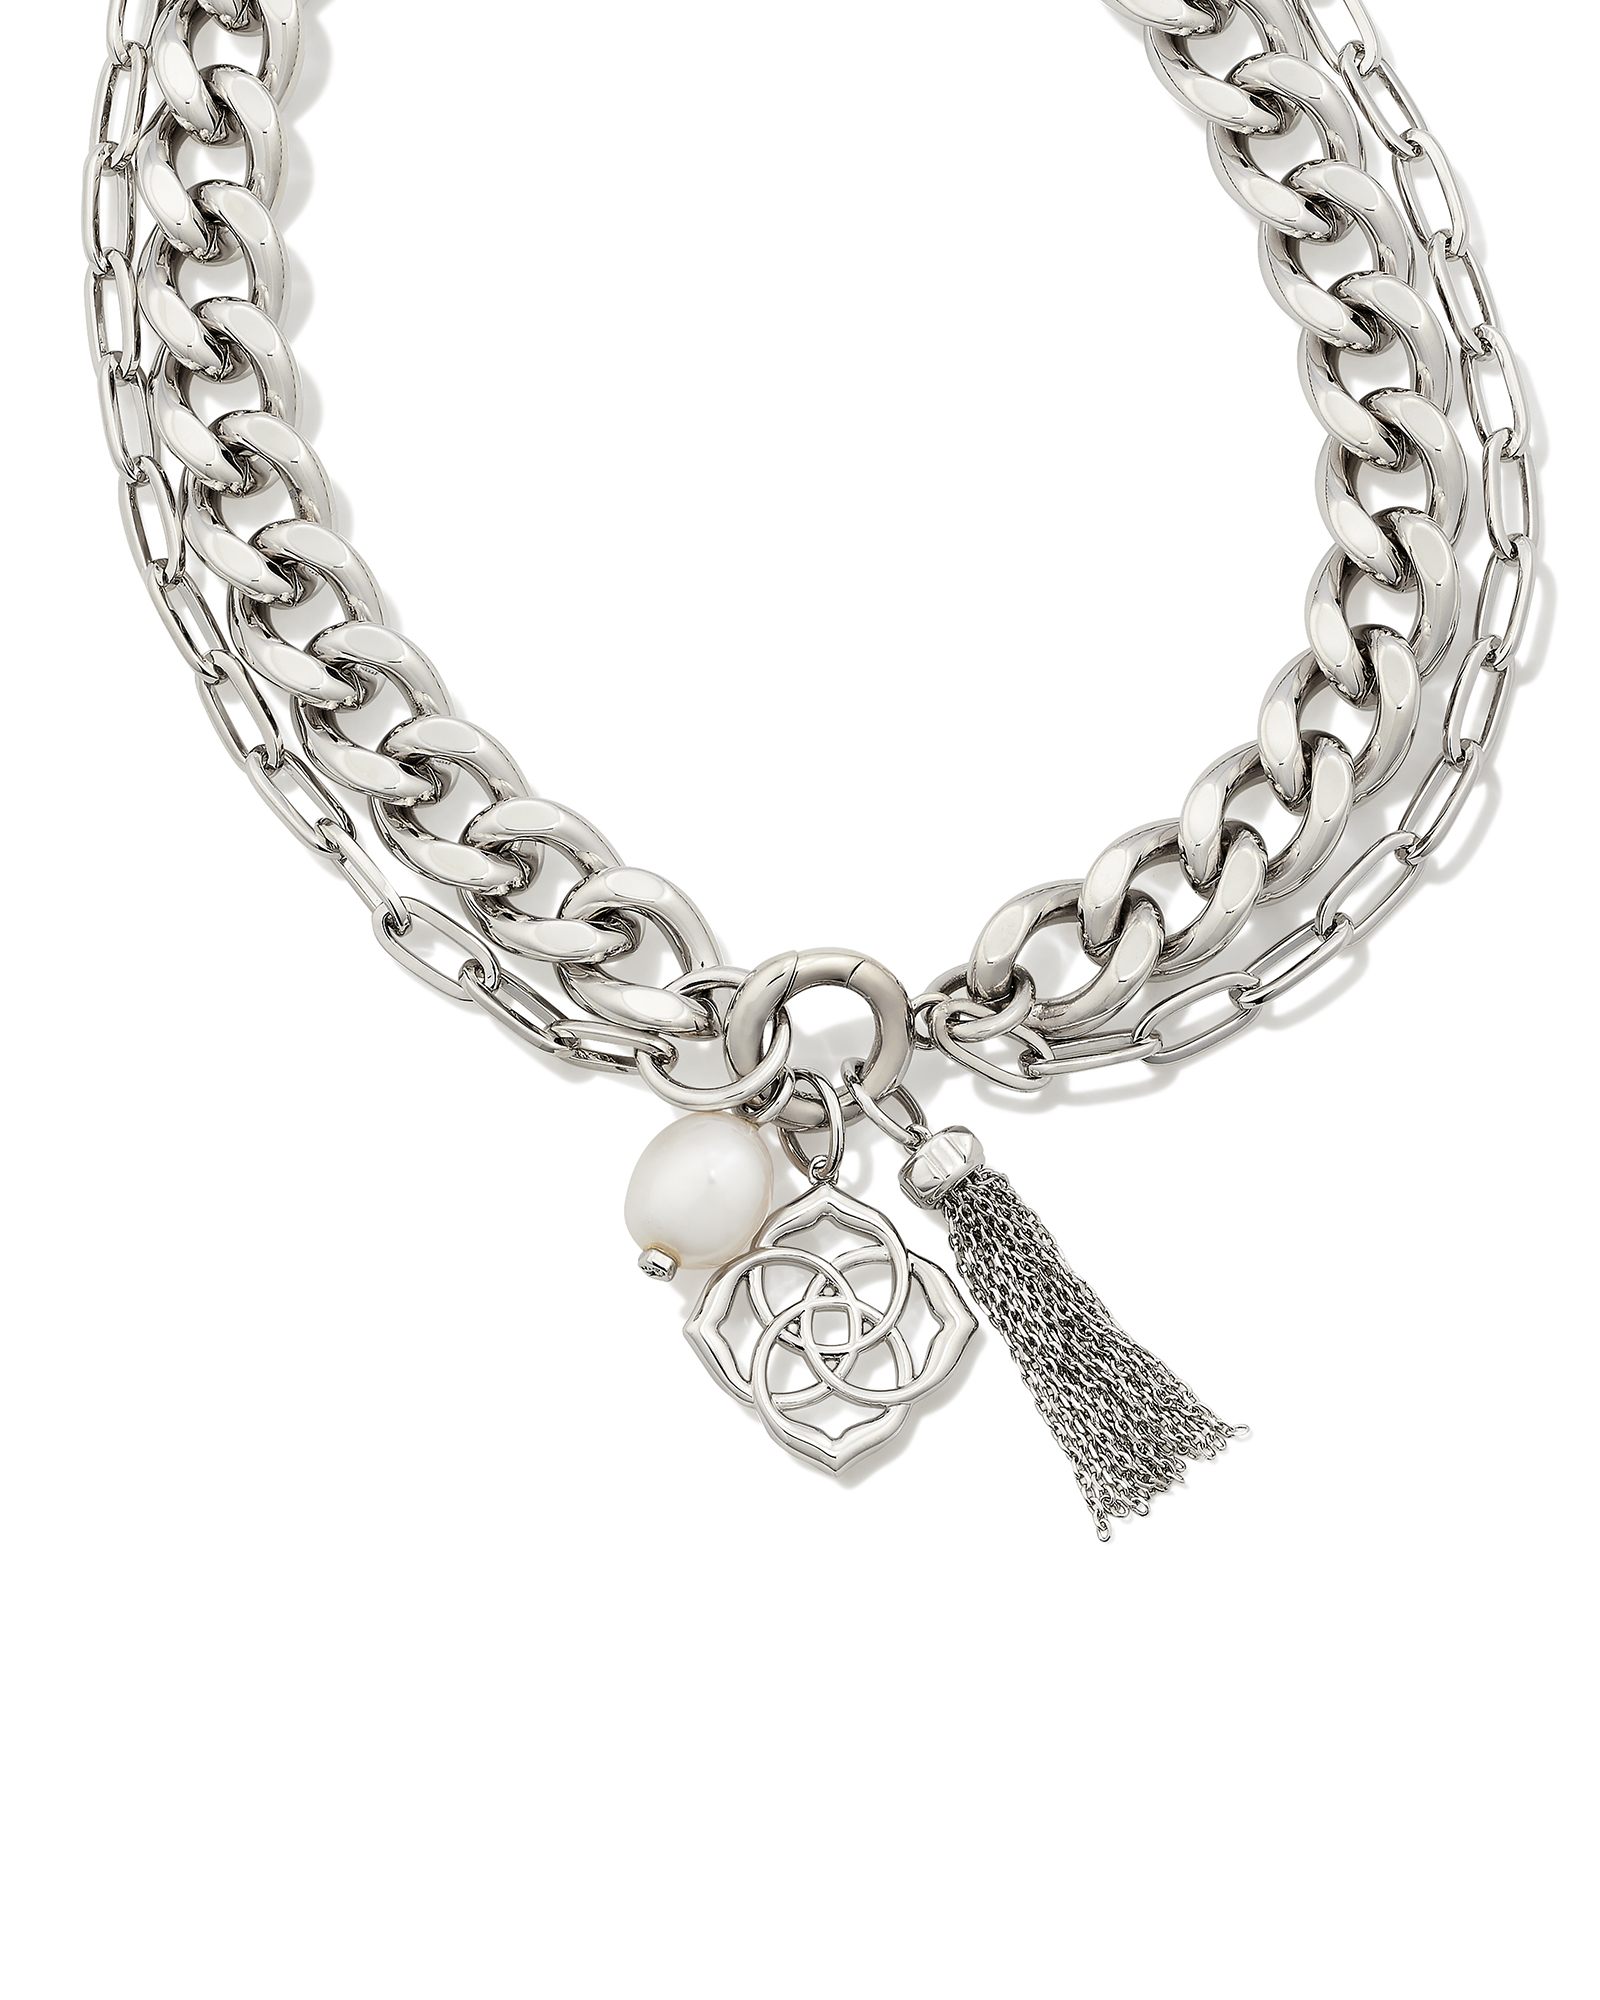 Everleigh Silver Chain Necklace in White Pearl